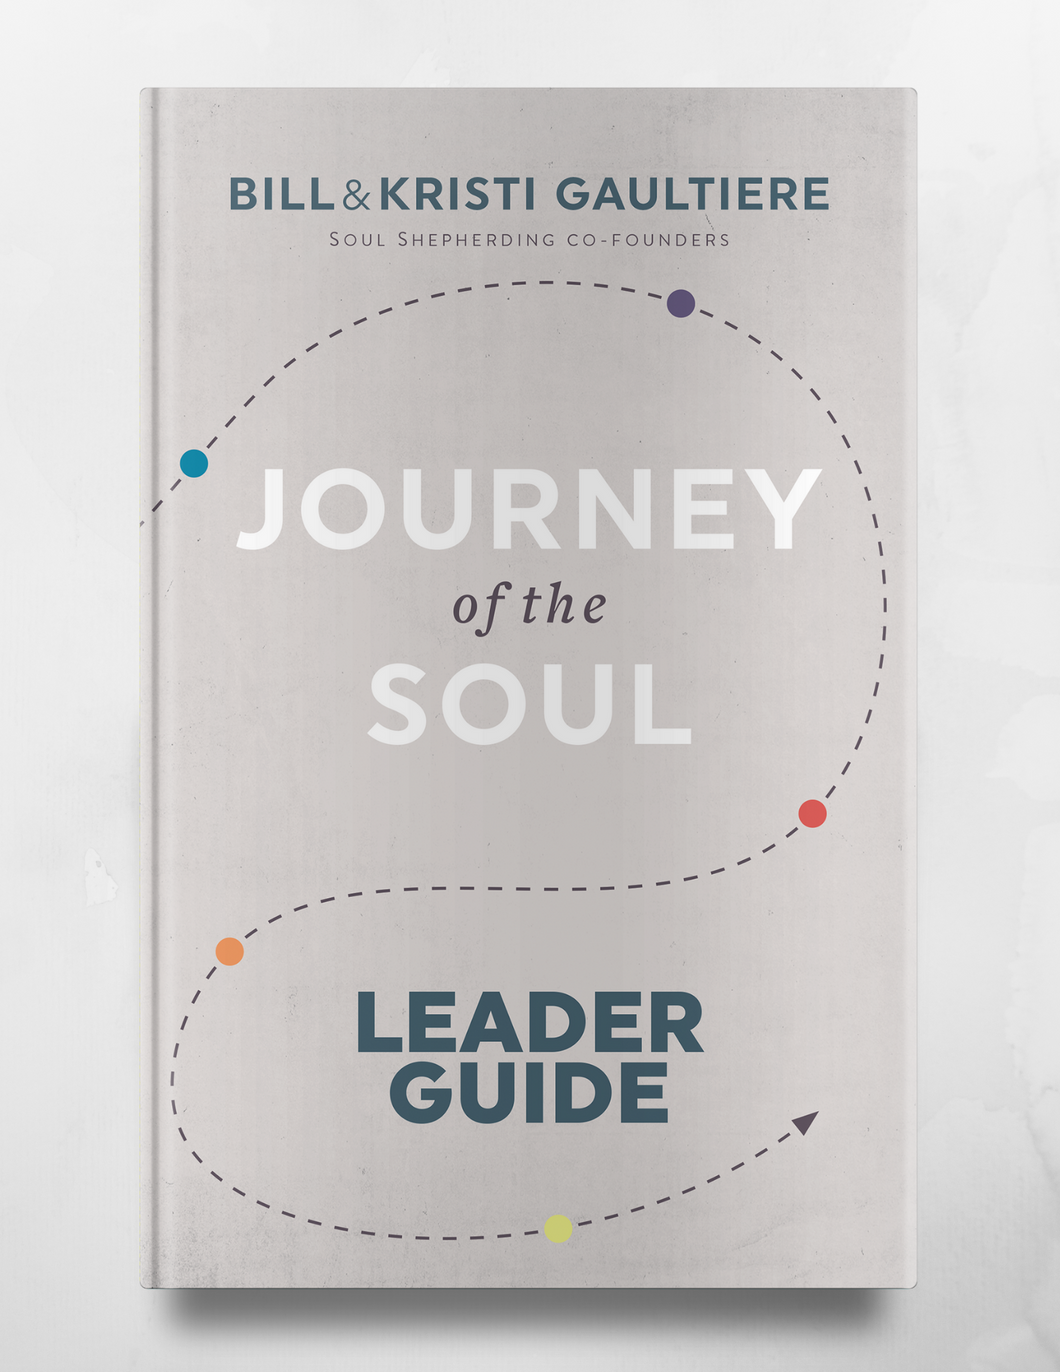 Journey of the Soul: Leader Guide